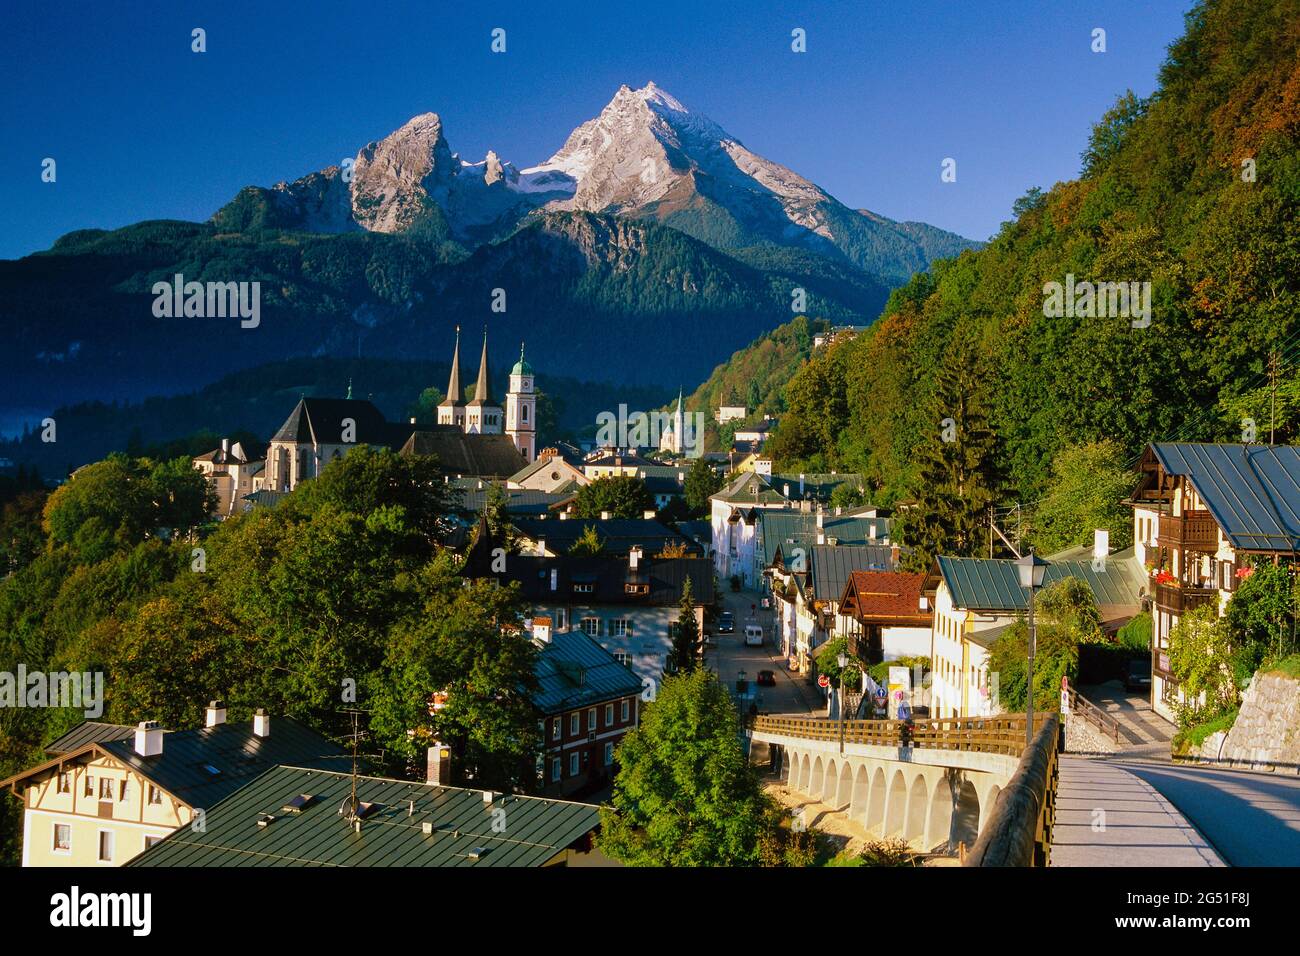 Town with mountains in background, Berchtesgaden, Bavaria, Germany Stock Photo